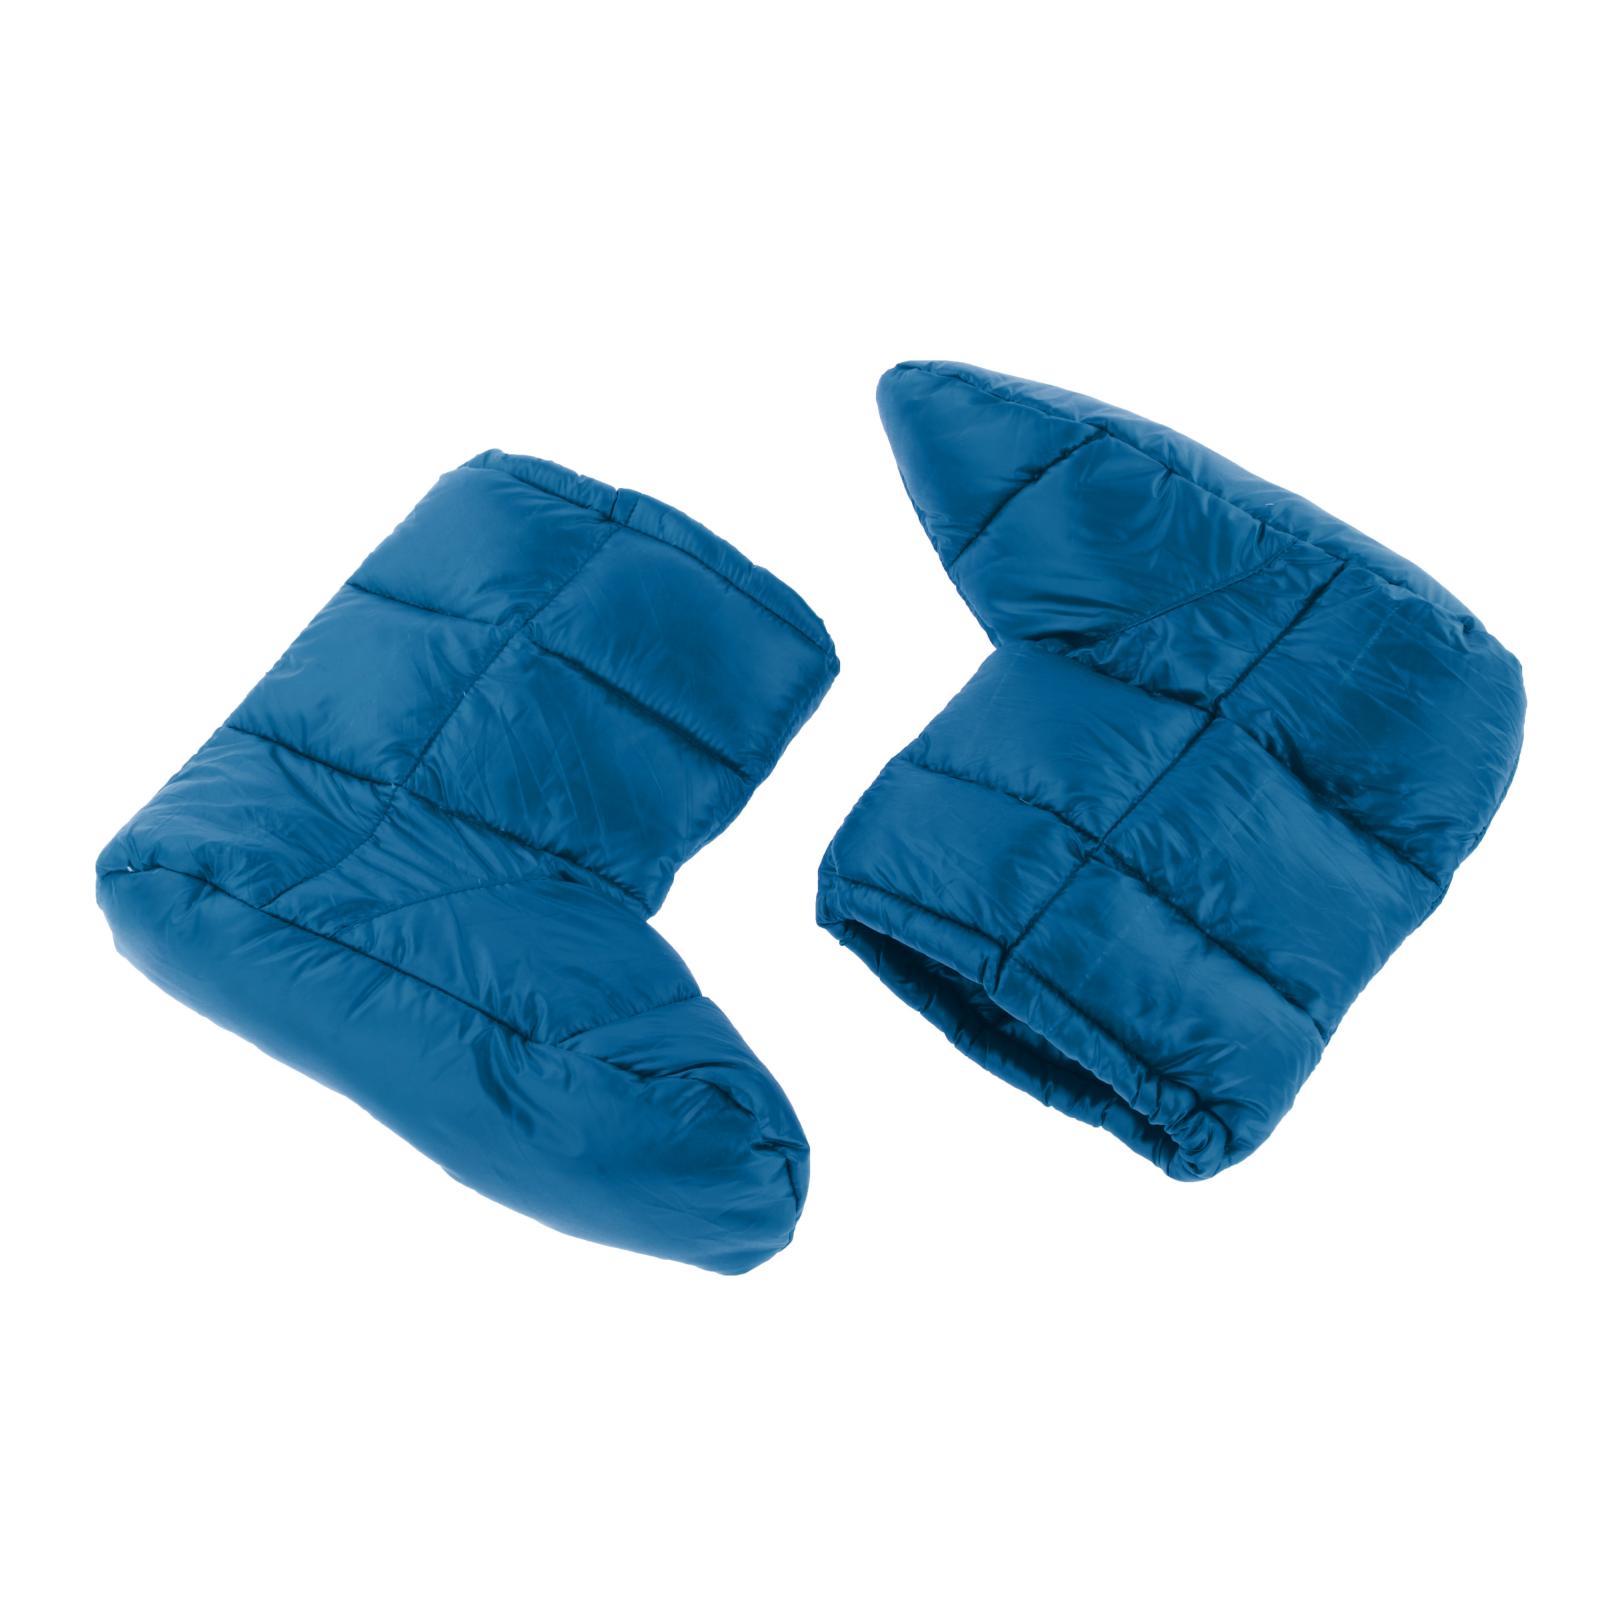 Warm Down Slippers Booties Anti-Skid Shoes for Outdoor House Unisex blue M